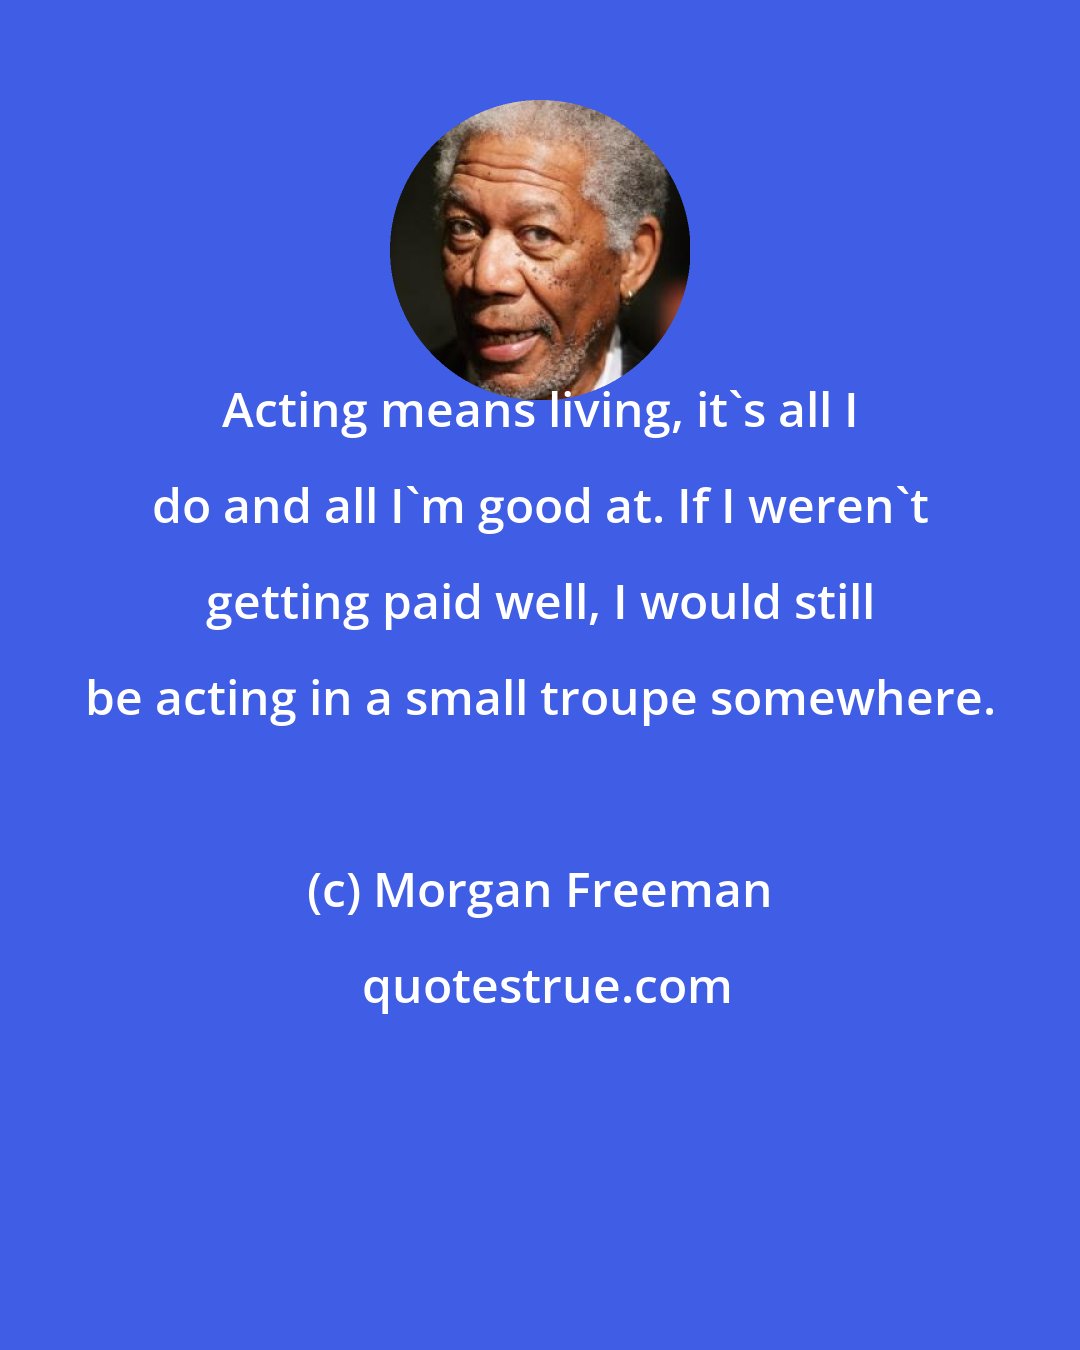 Morgan Freeman: Acting means living, it's all I do and all I'm good at. If I weren't getting paid well, I would still be acting in a small troupe somewhere.